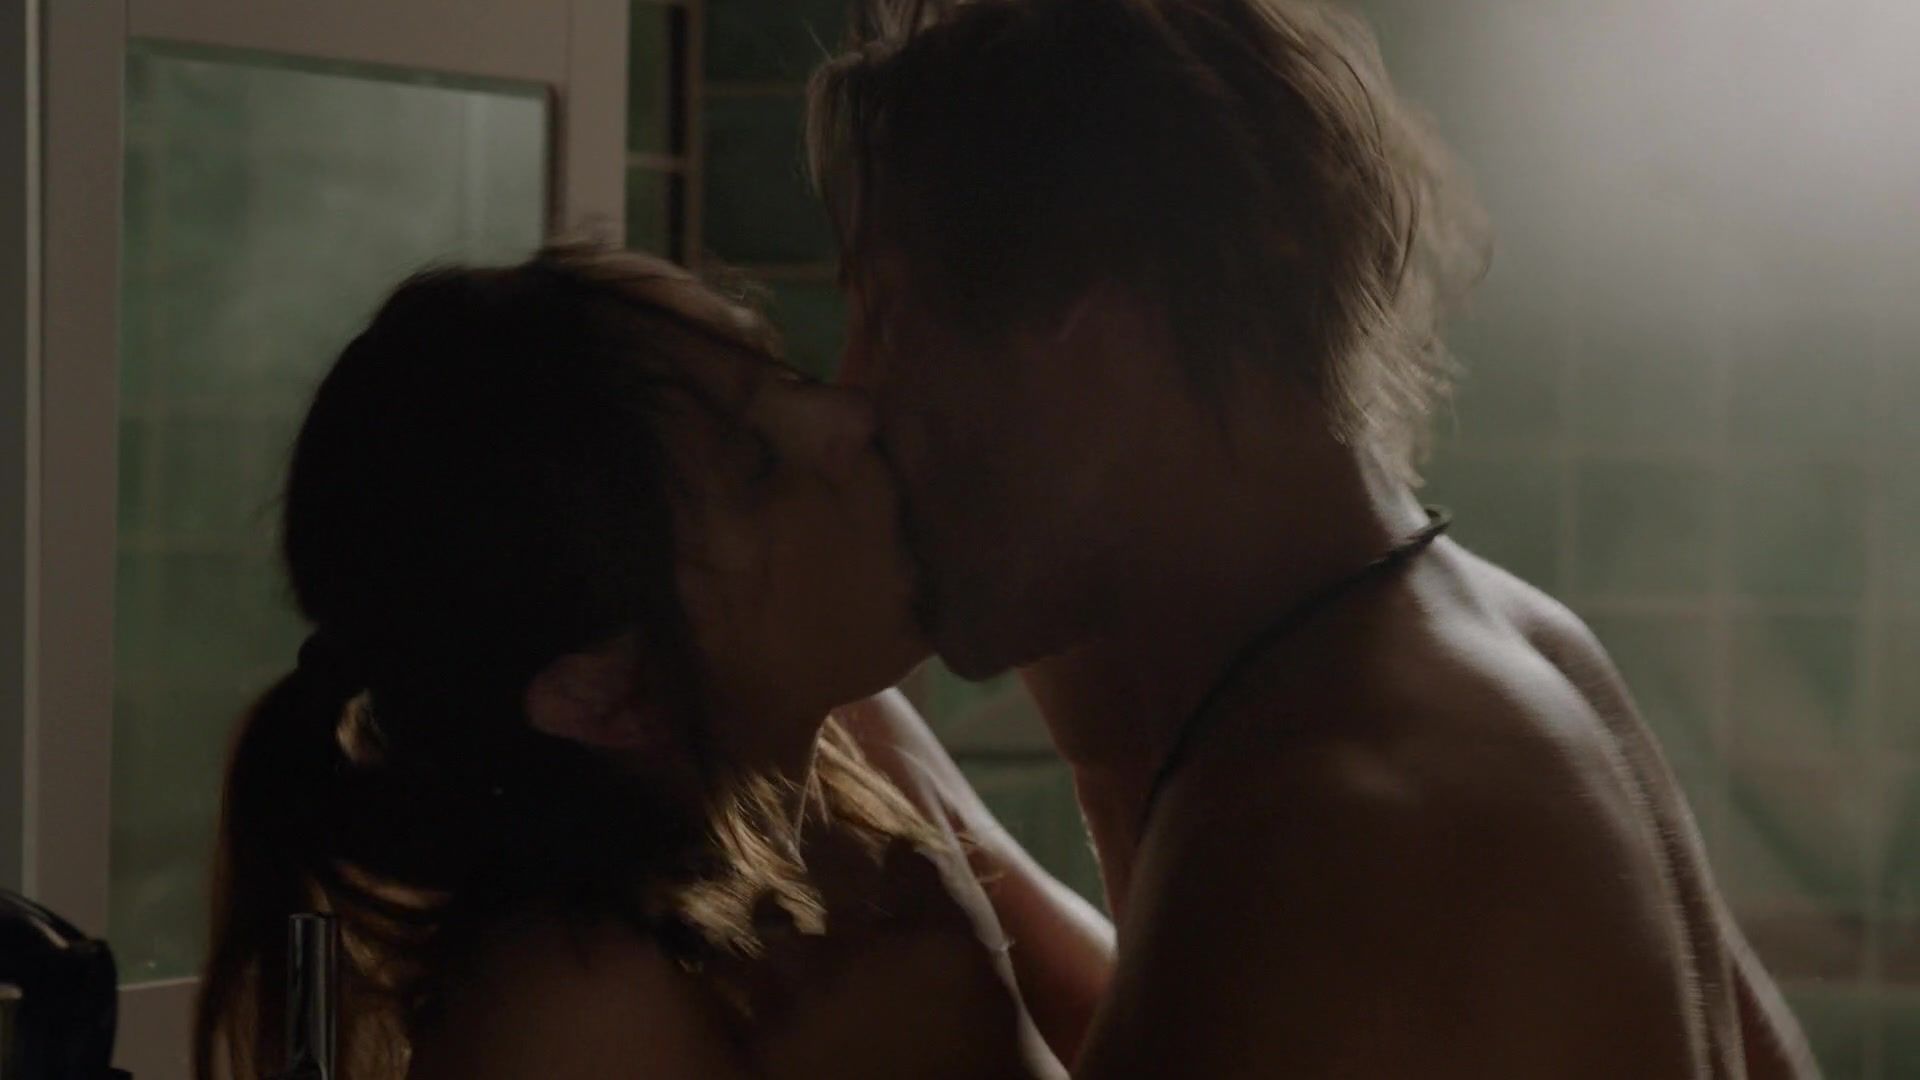 Red Head Naked Sarah Wayne Callies in Sex Scene from the TV show "Colony" s01e03 (2016) Groping